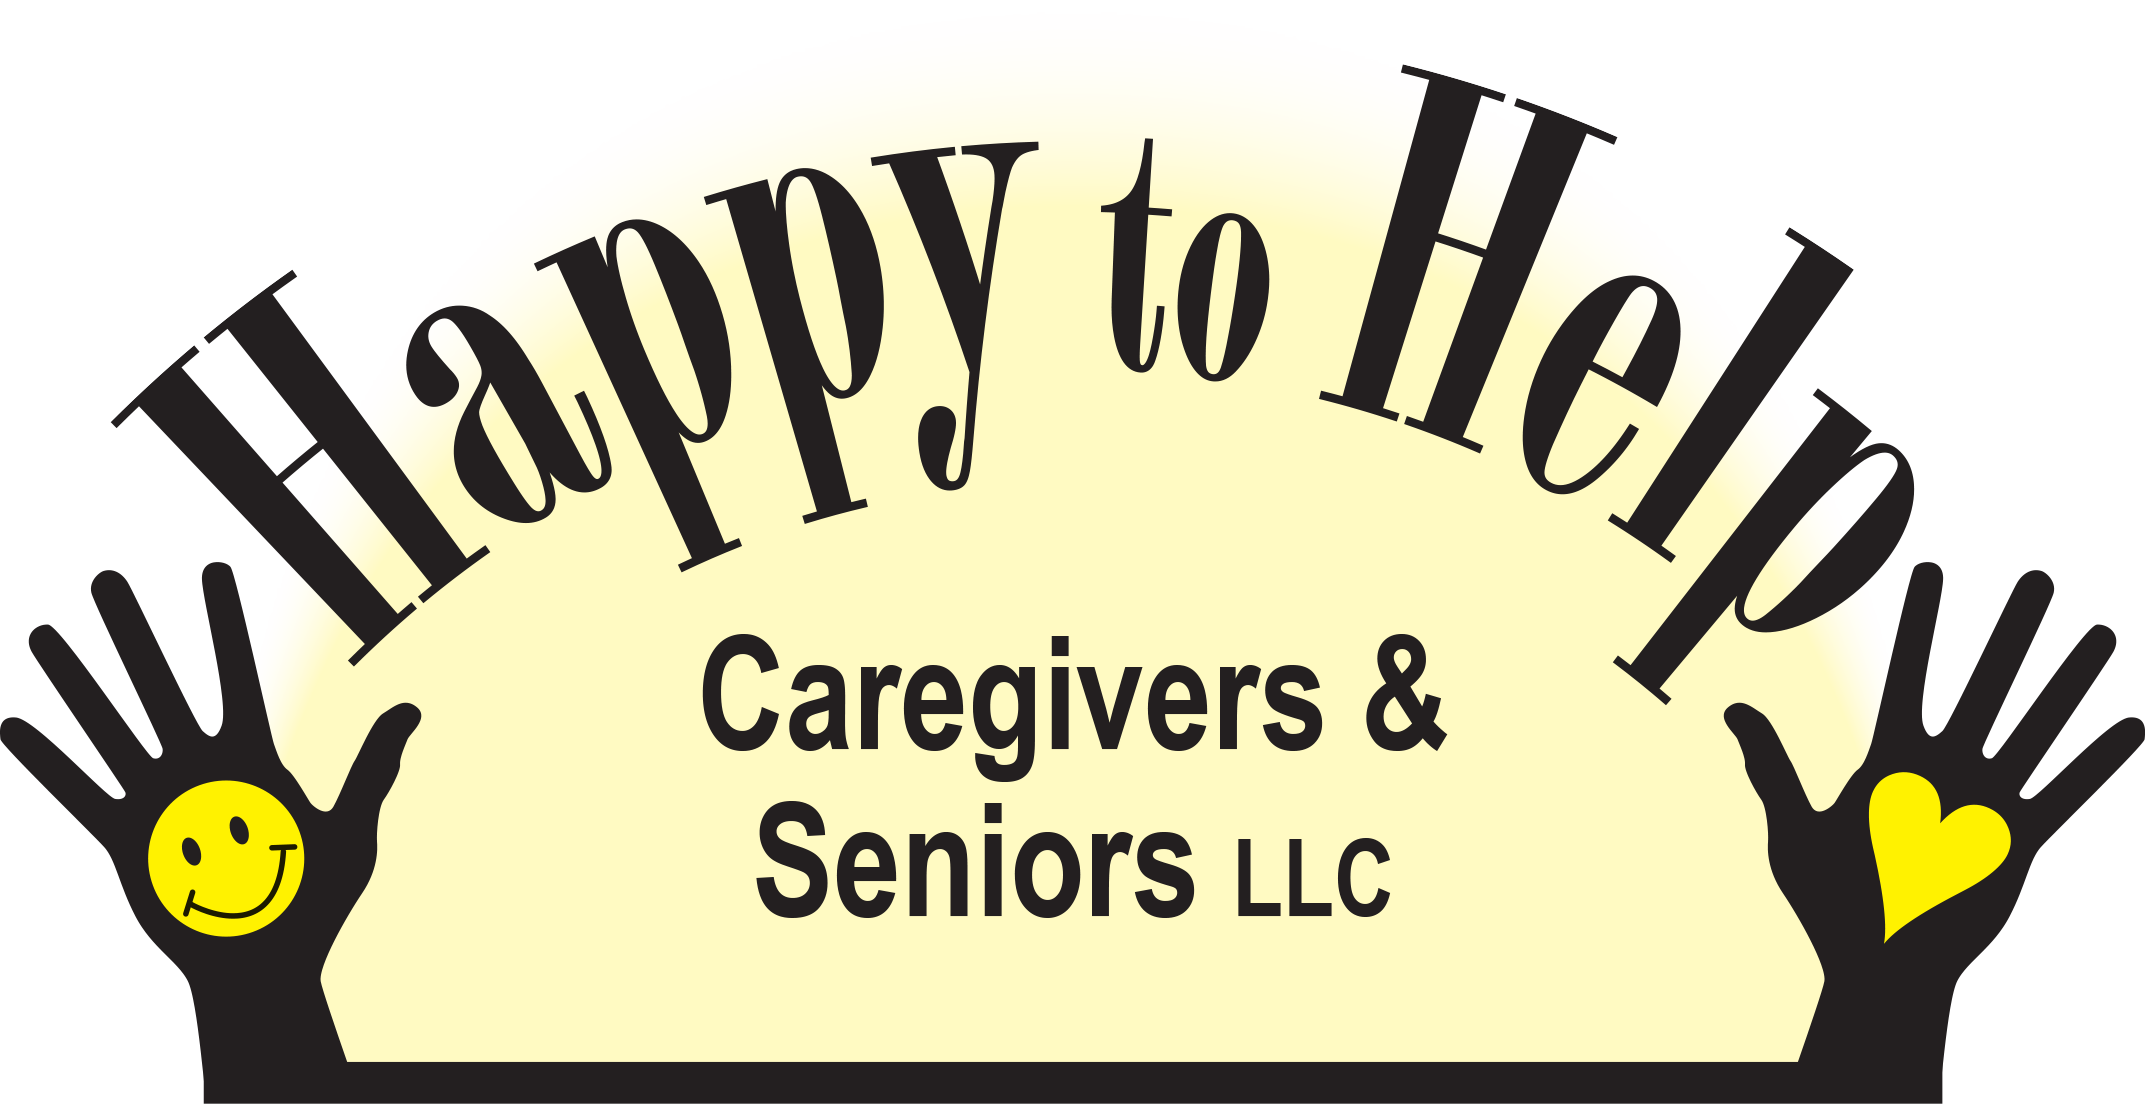 Happy to Help Caregivers and Seniors